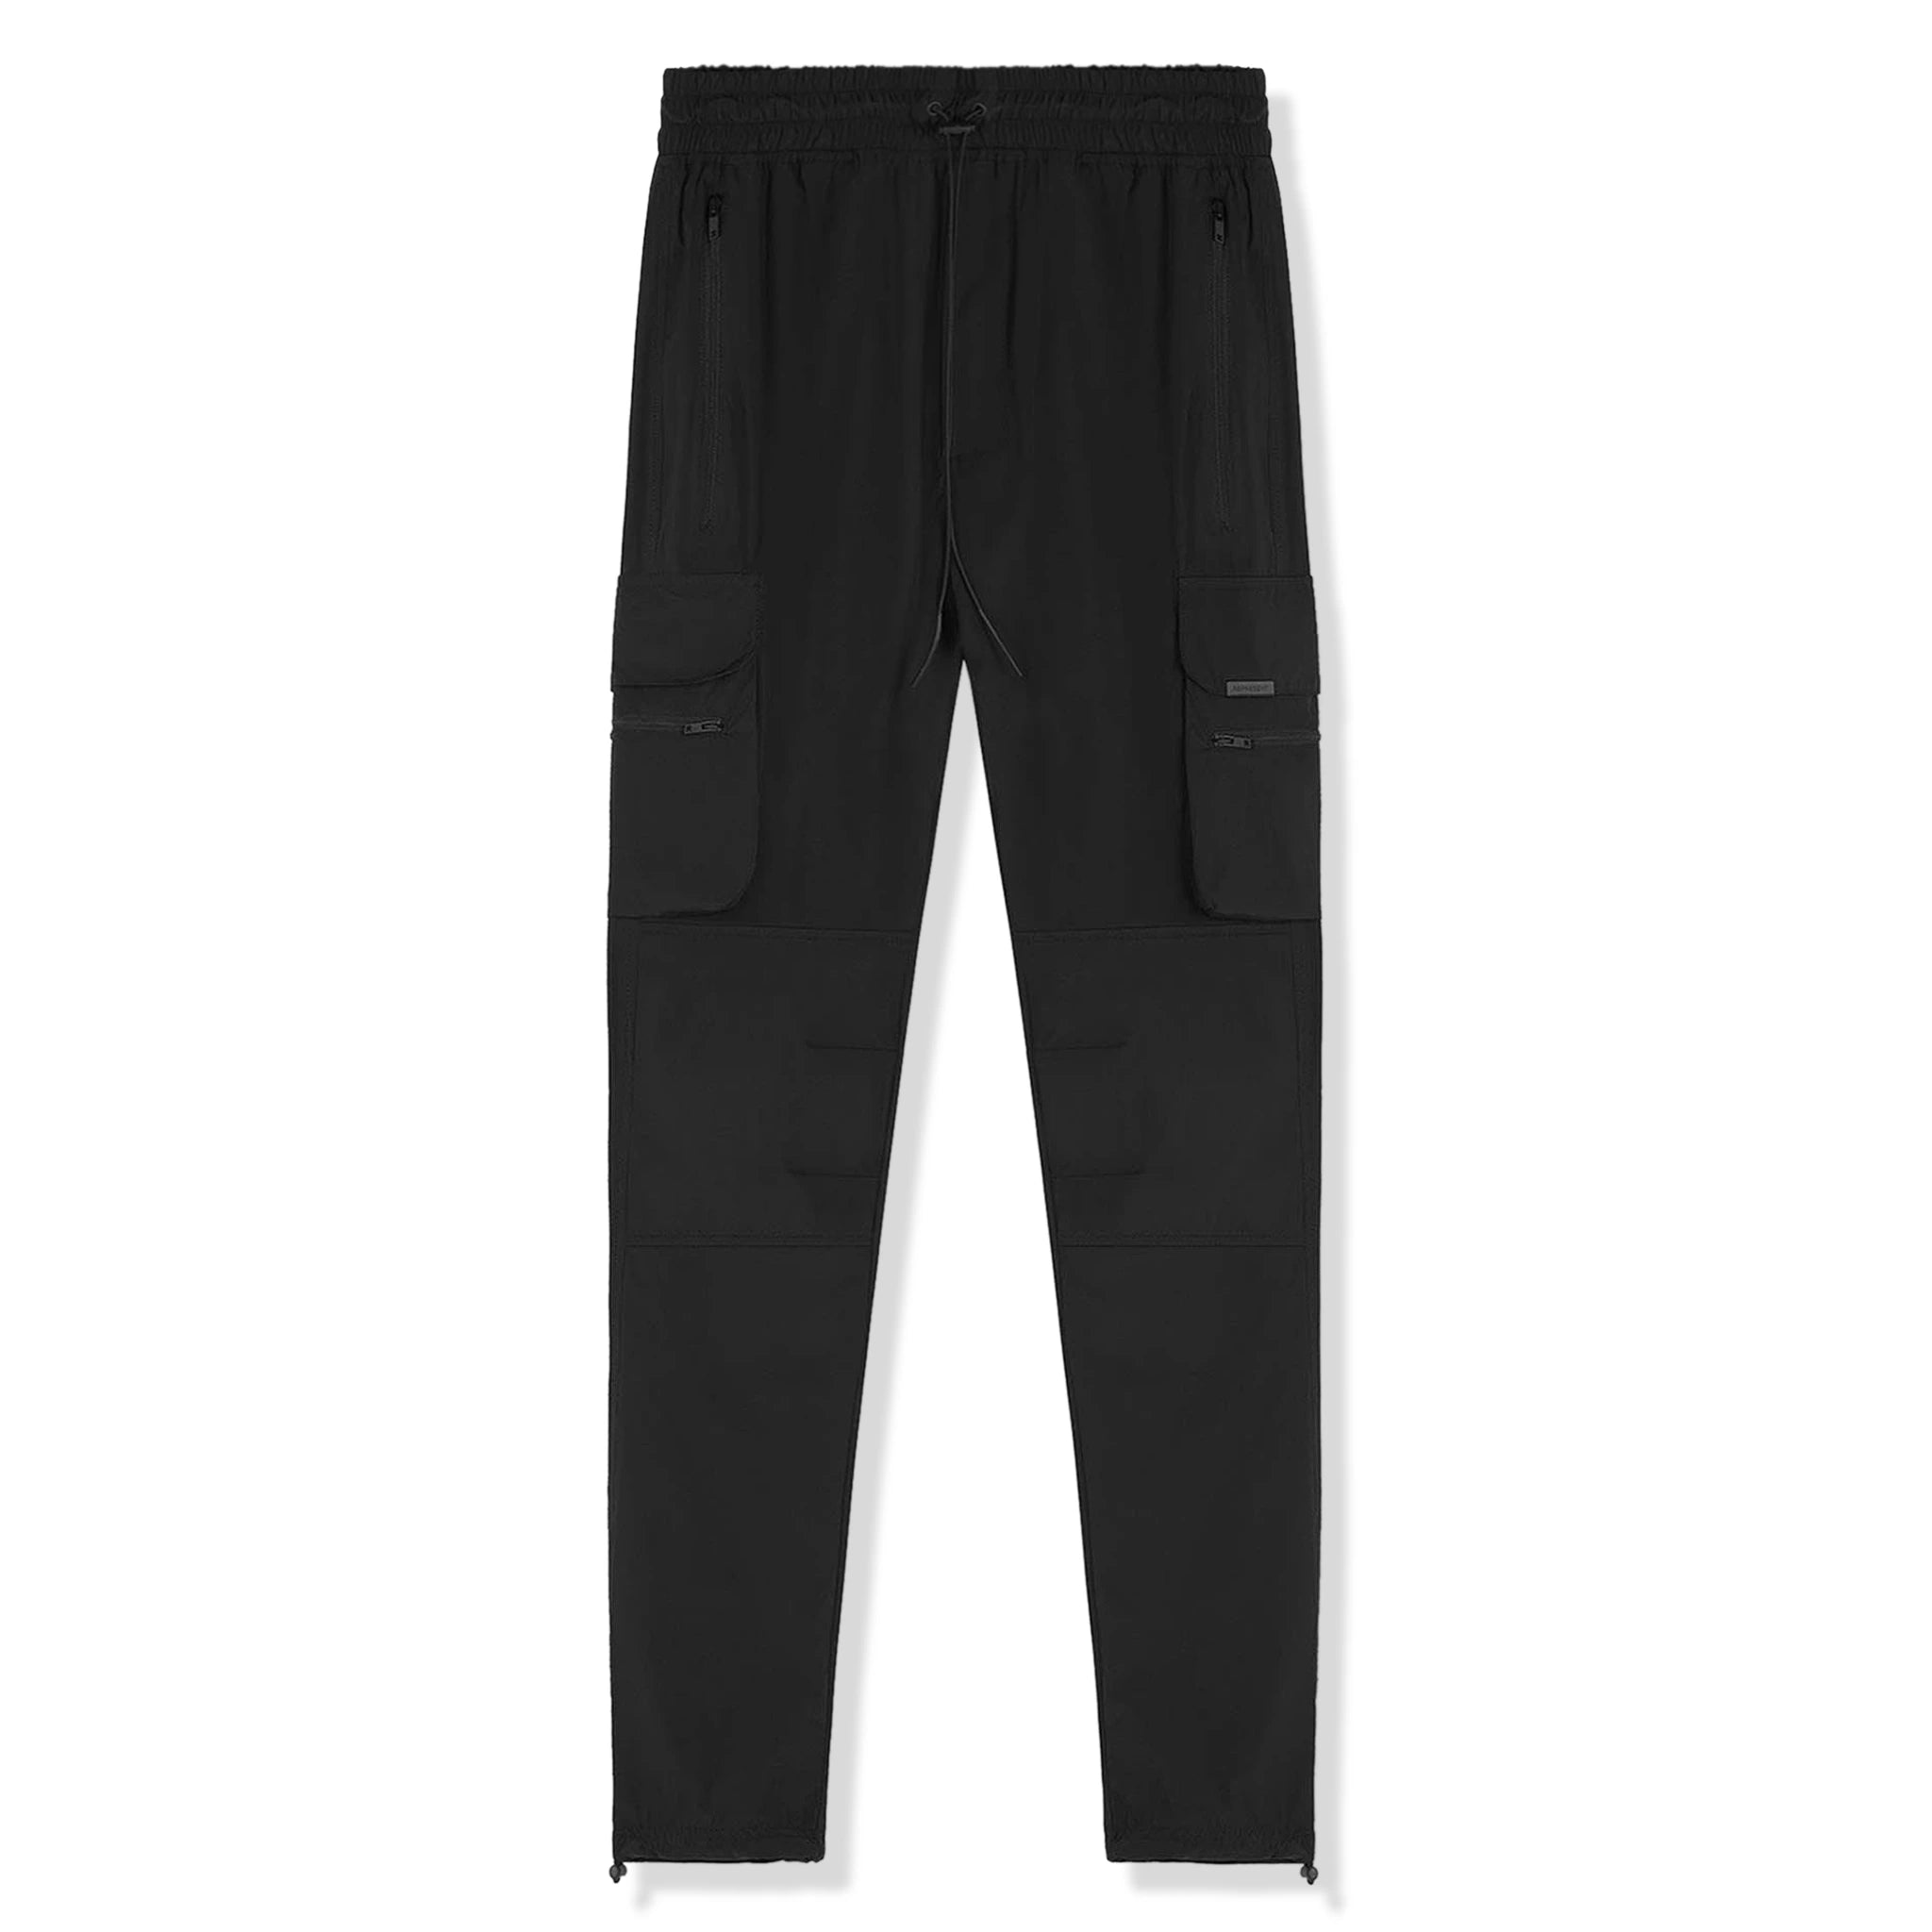 Front view of Represent 247 Black Cargo Pants